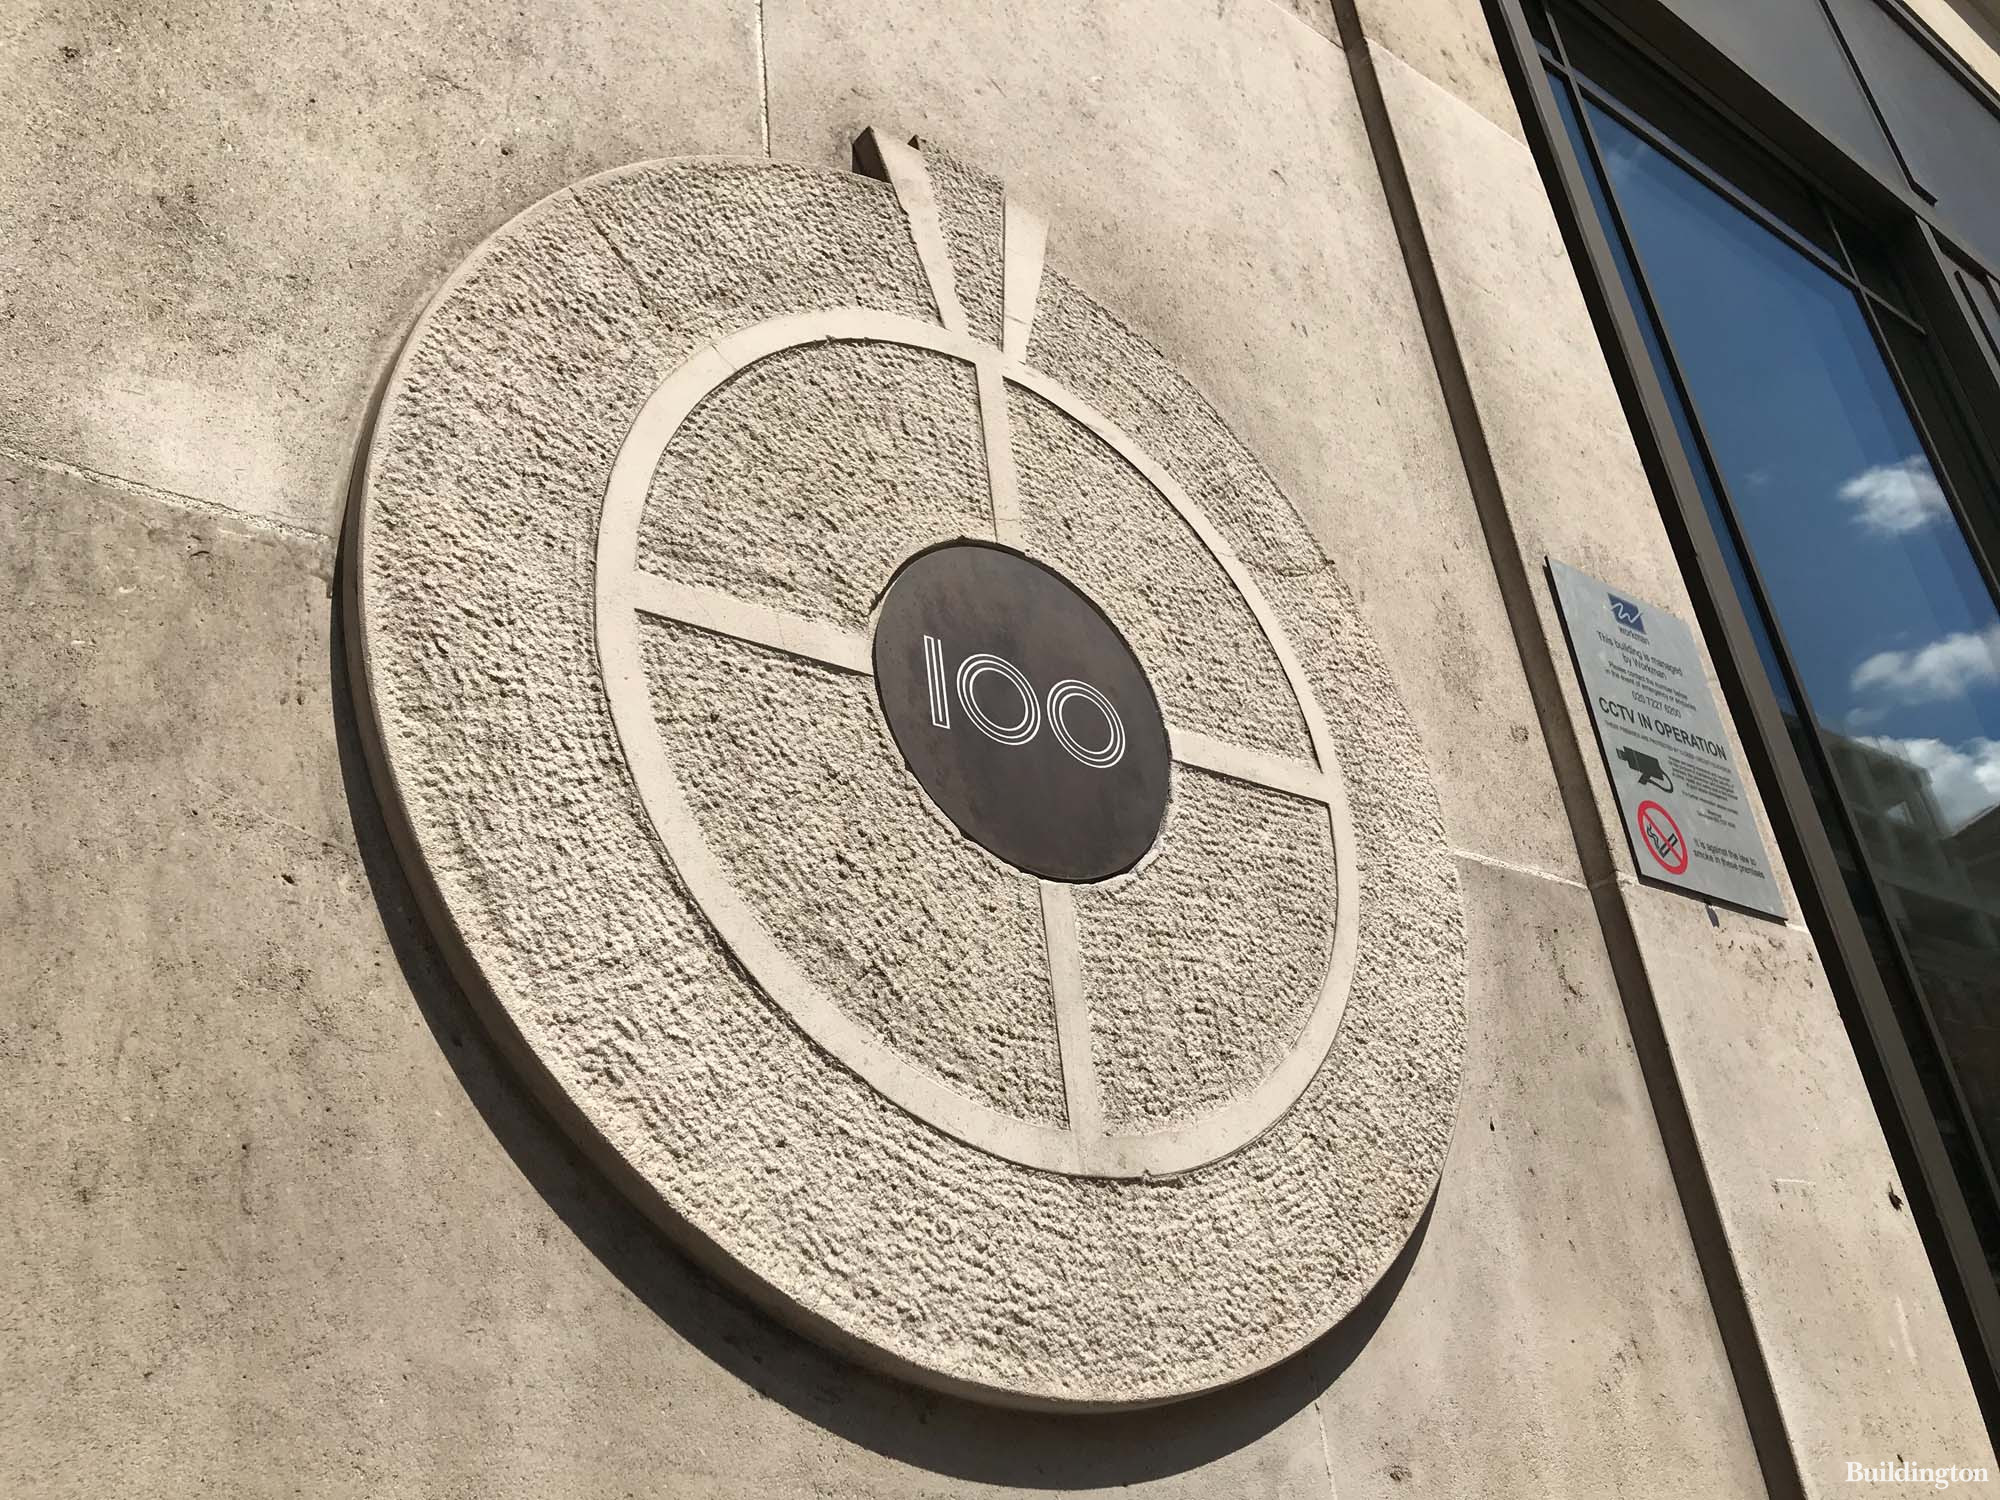 100 Oxford Street sign on the building at the entrance.